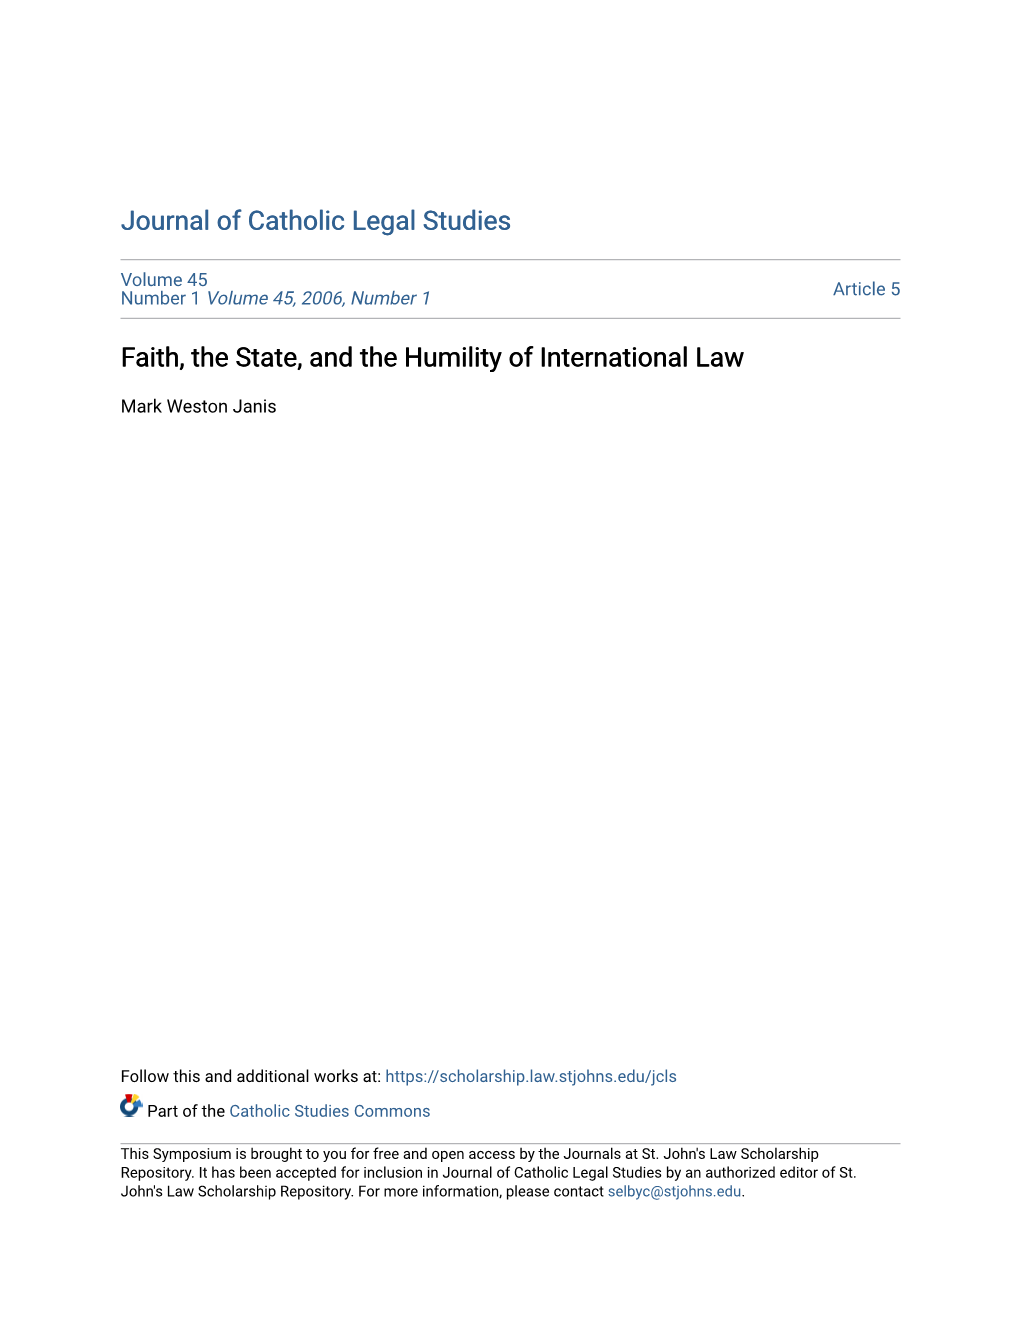 Faith, the State, and the Humility of International Law